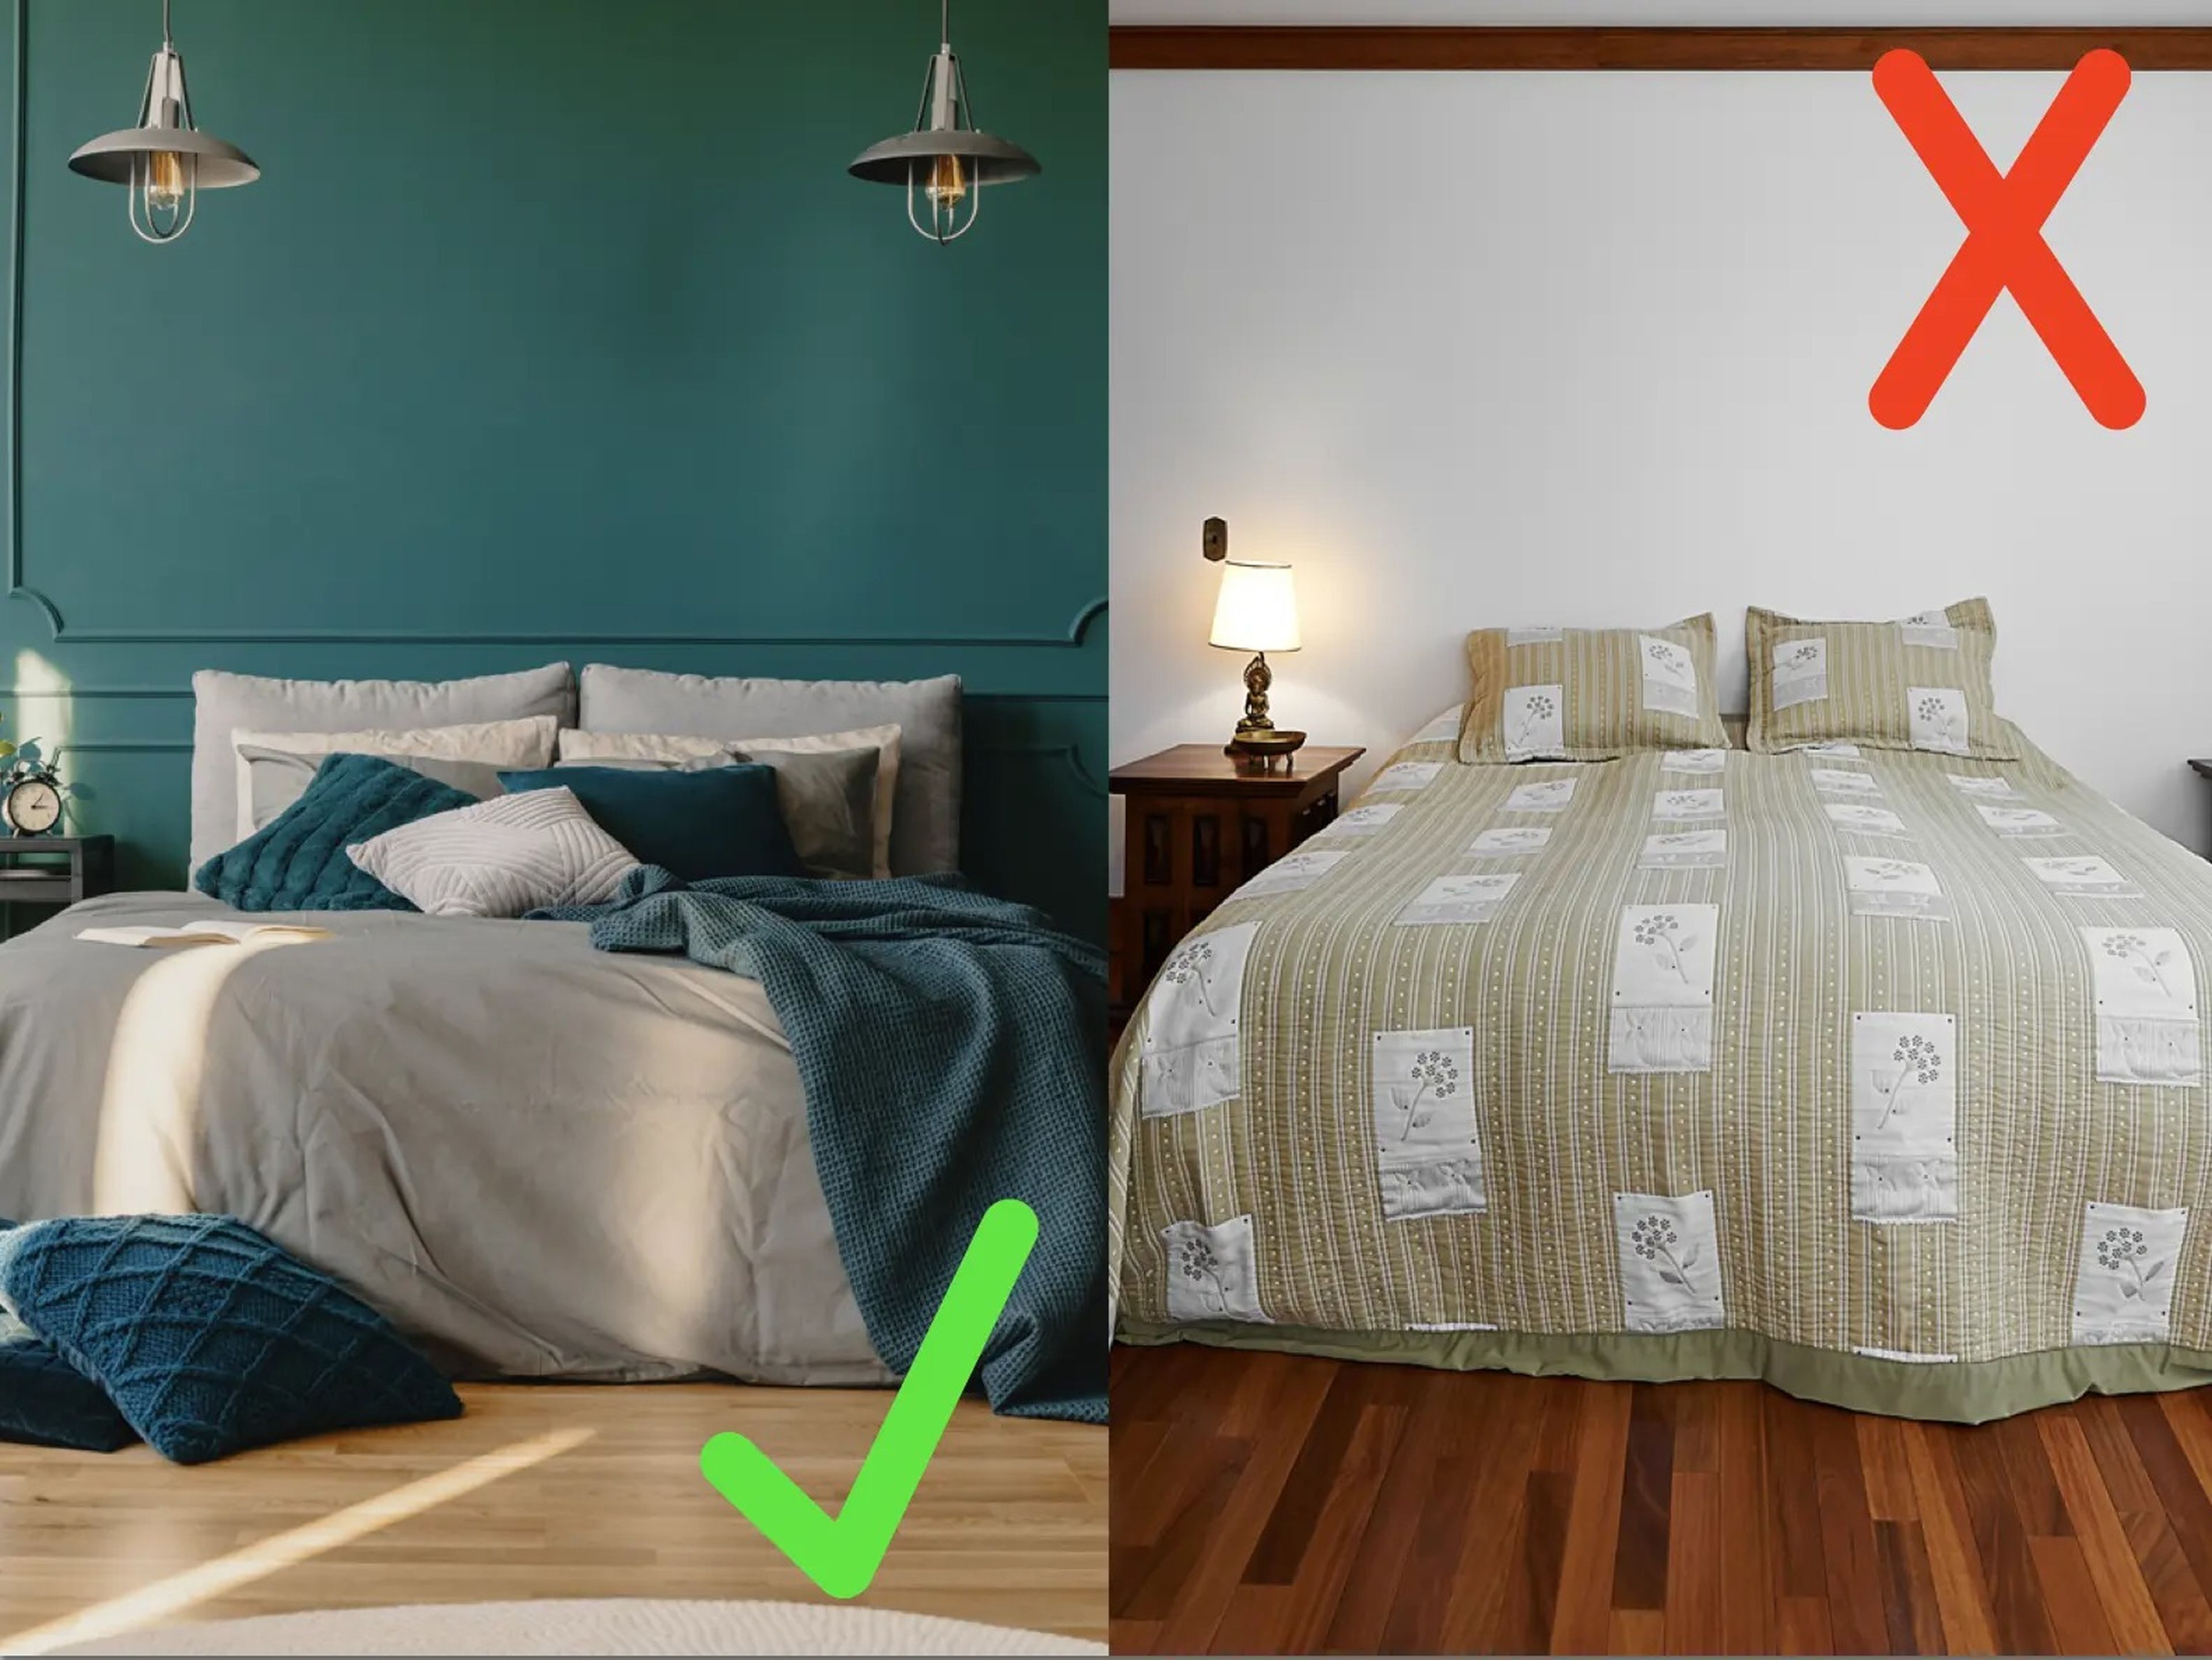 Bedroom with green wall, throw, and pillows and a checkmark; Bedroom with bare wooden floors and red X